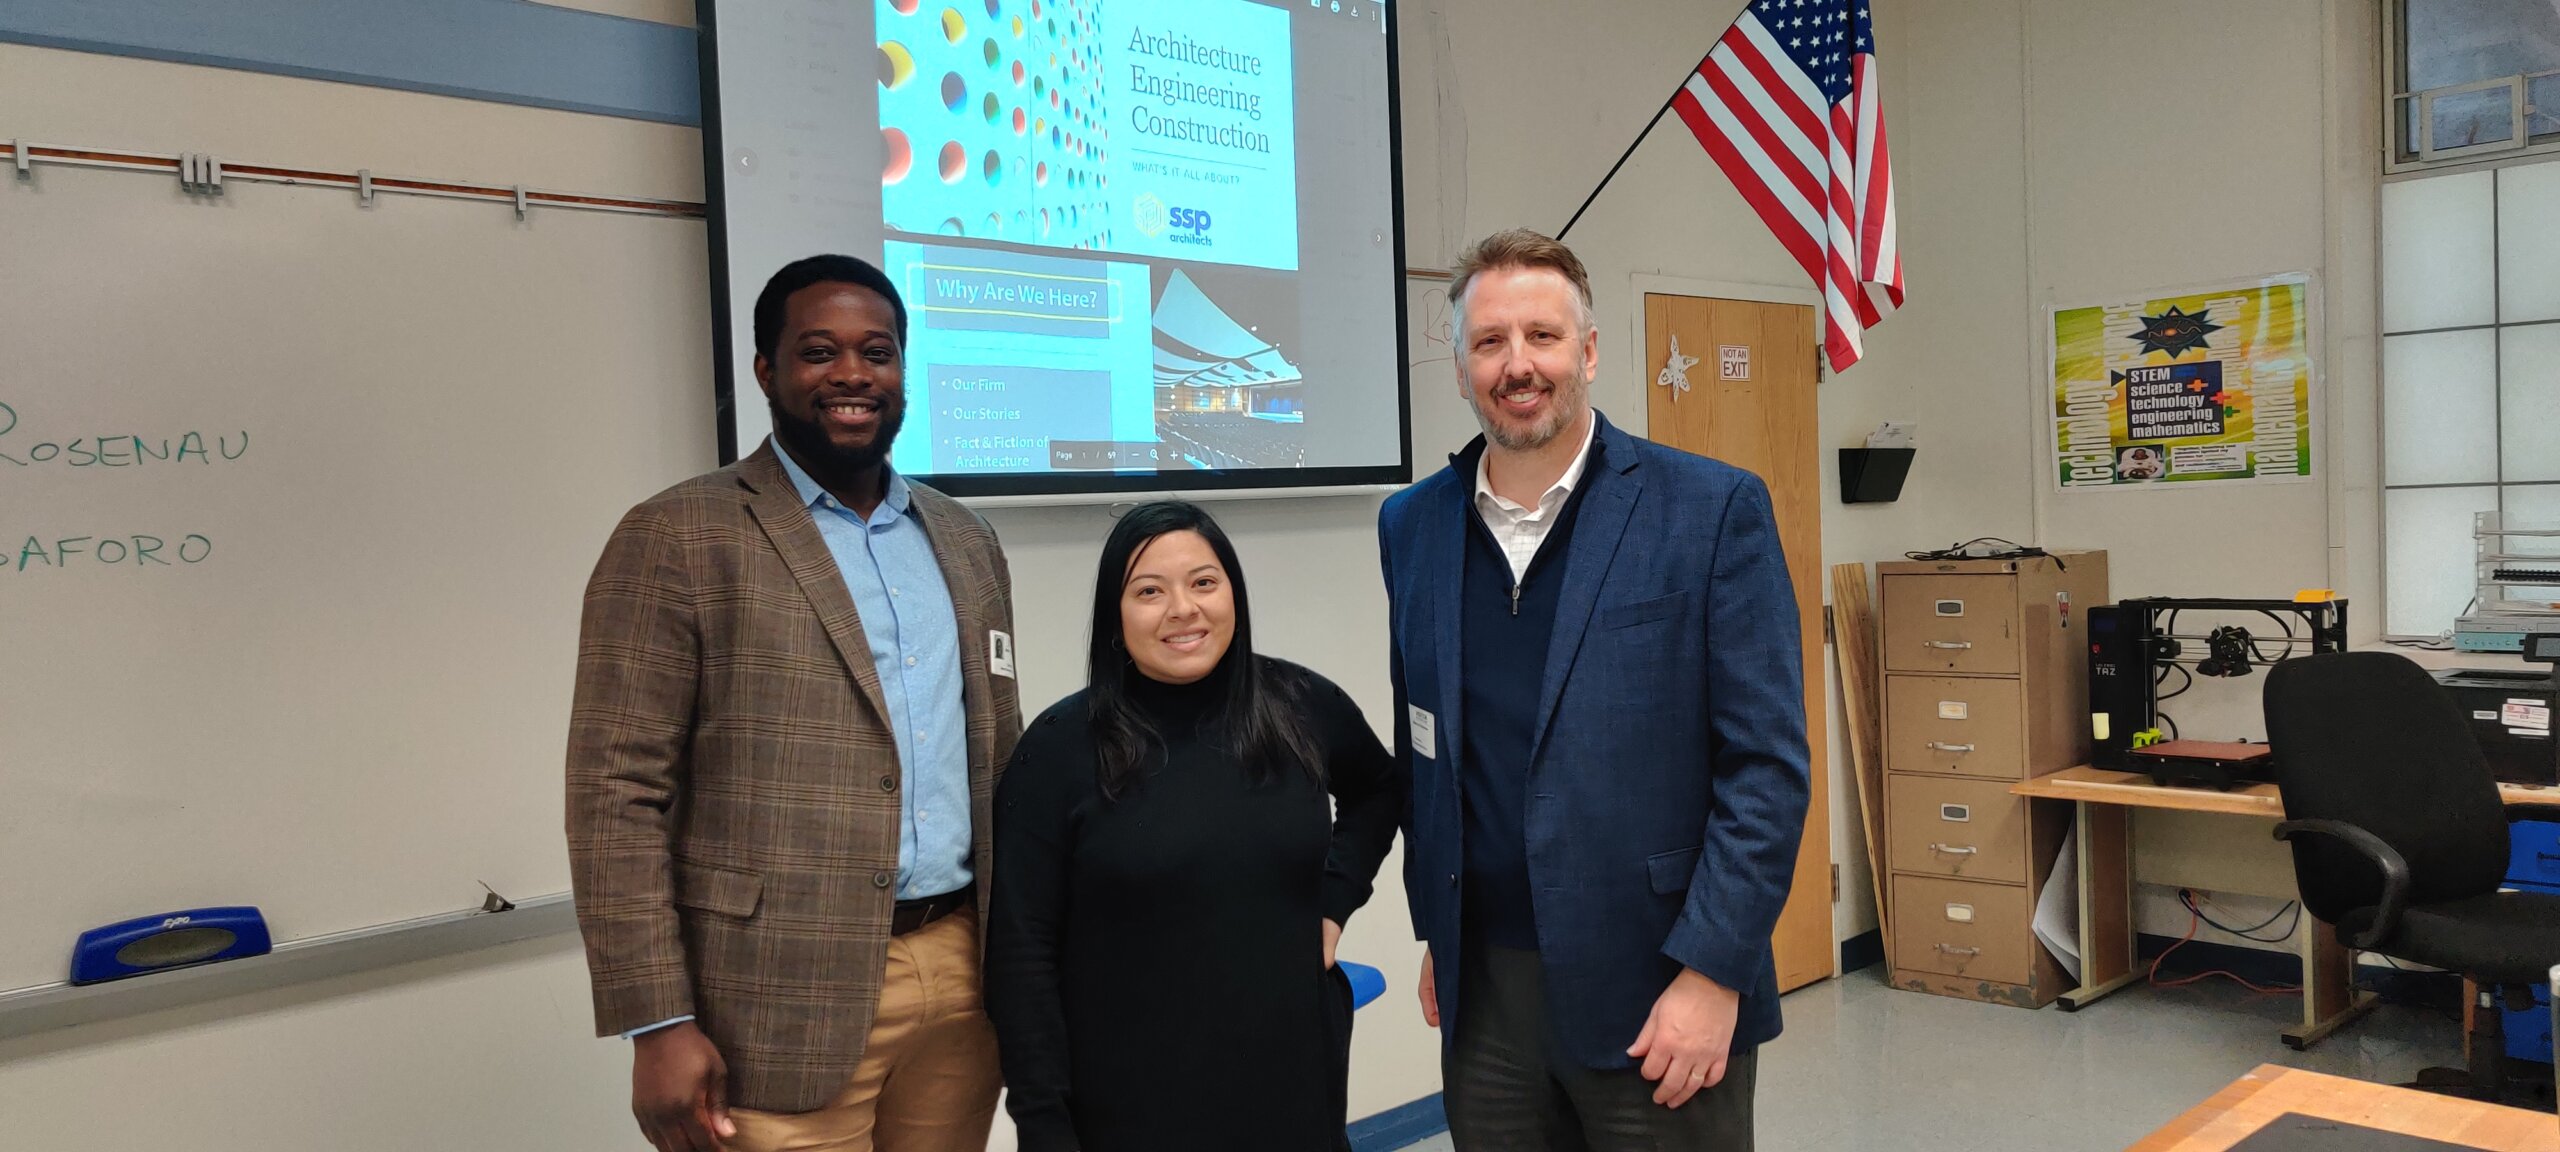 SSP Architects Principal Marcus Rosenau and Designer, Jude Saforo posing for a photo with West Orange High School teacher after speaking to her class about the architecture industry.